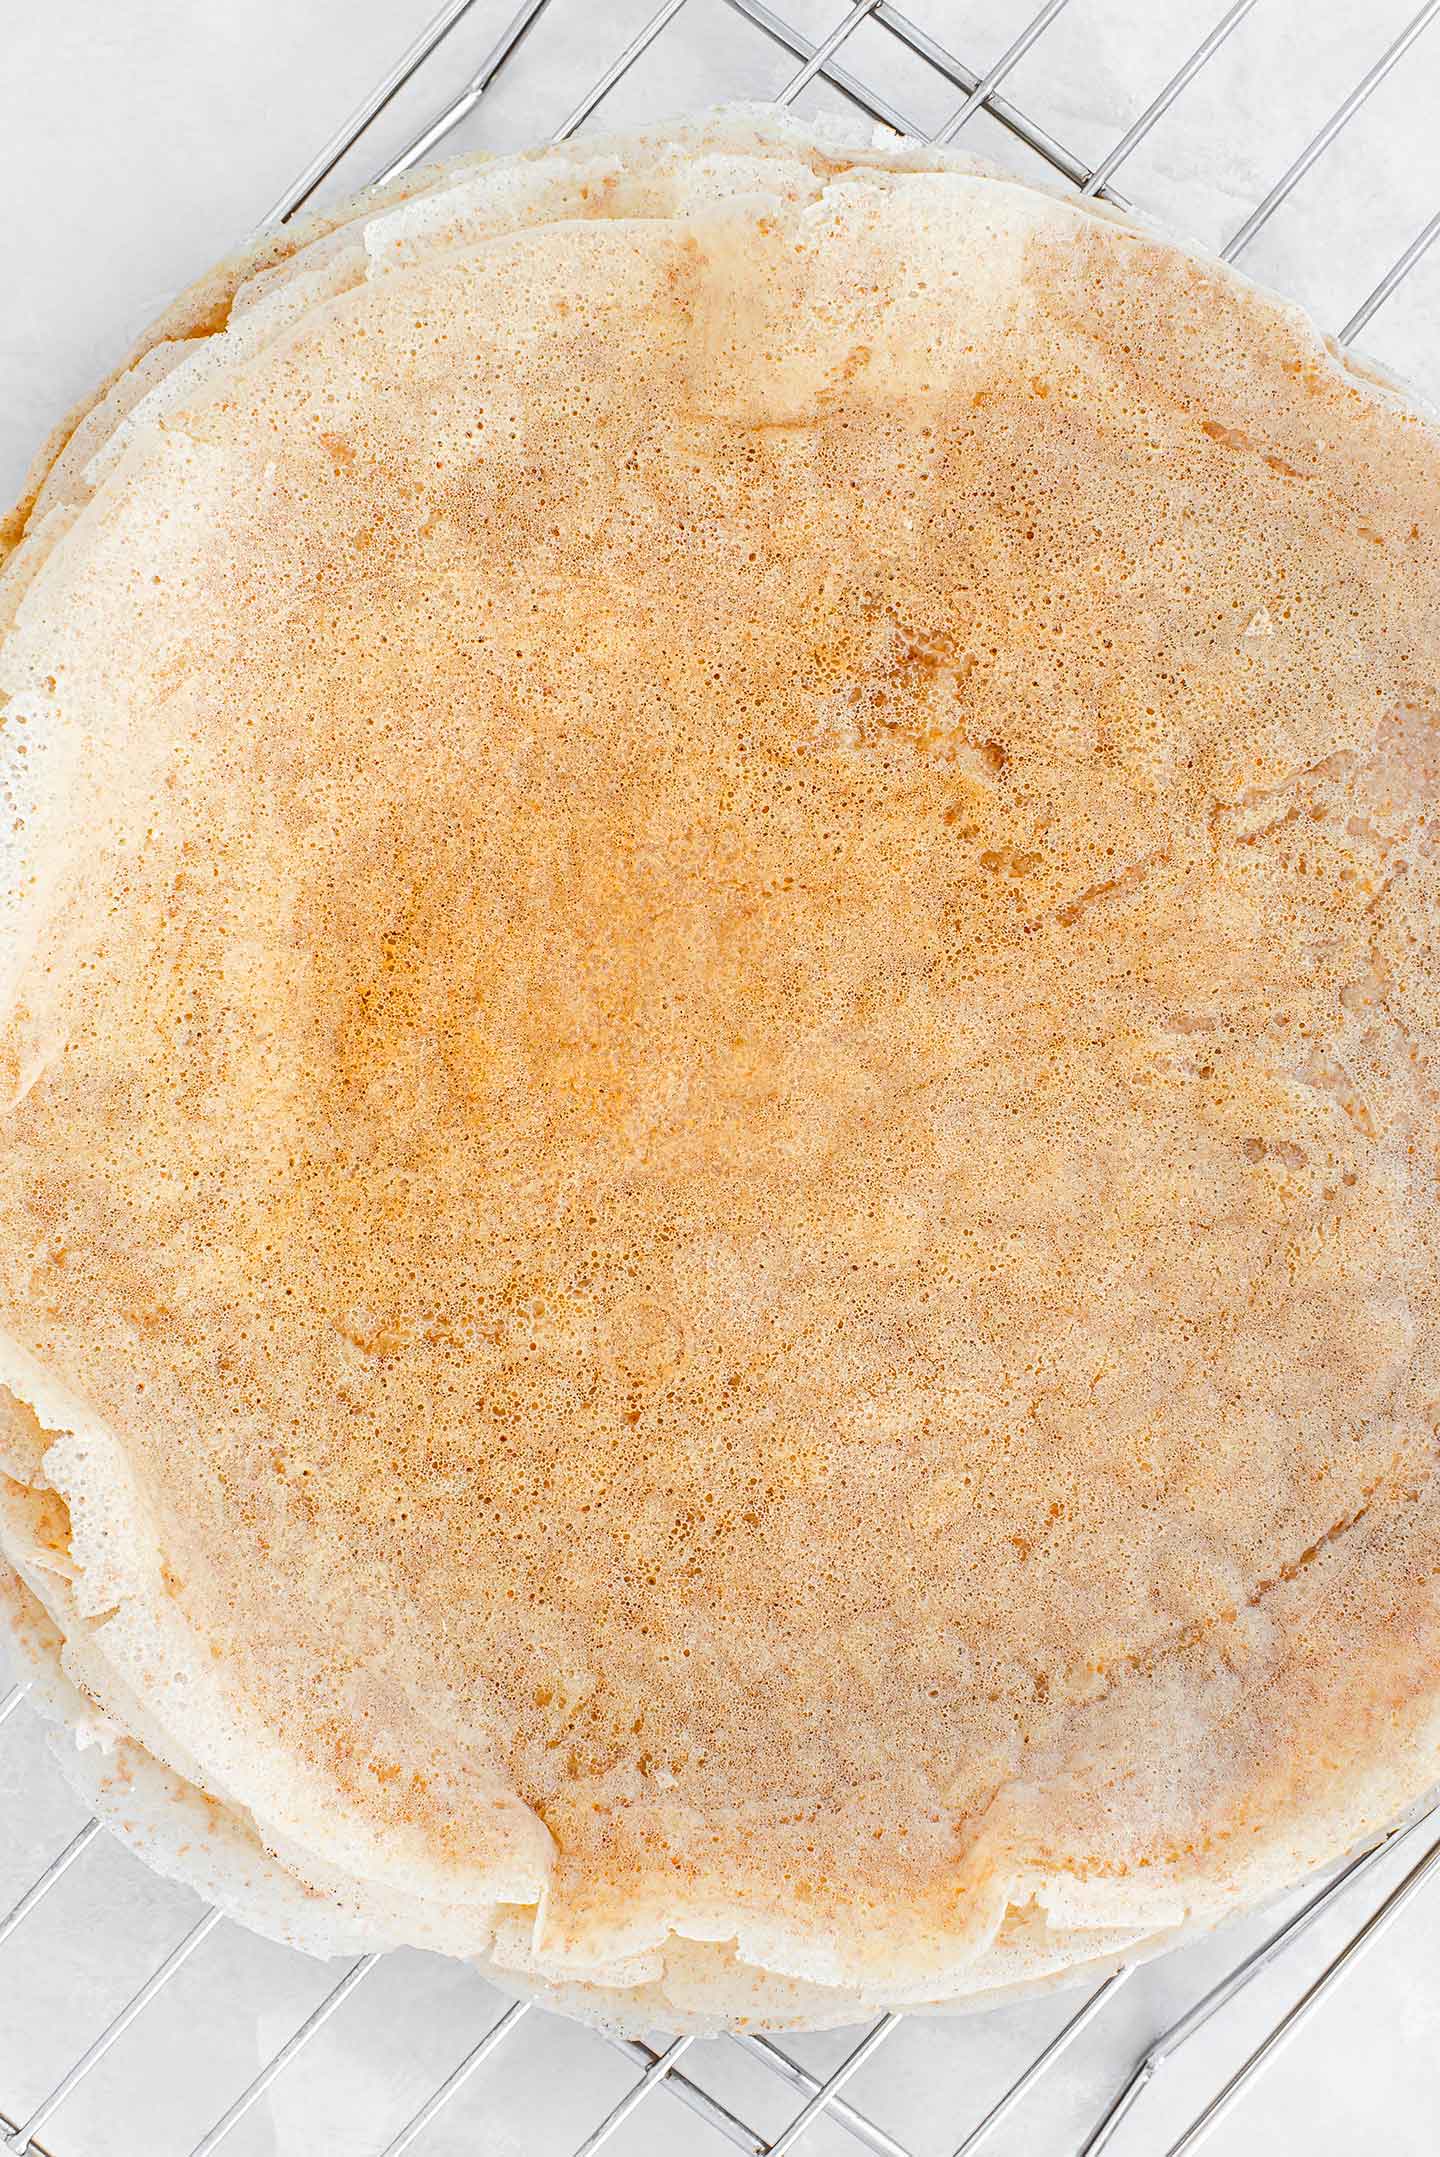 Top down view of a stack of cooked crepes cooling on a wire rack. The edges are crispy and the crepe is golden.